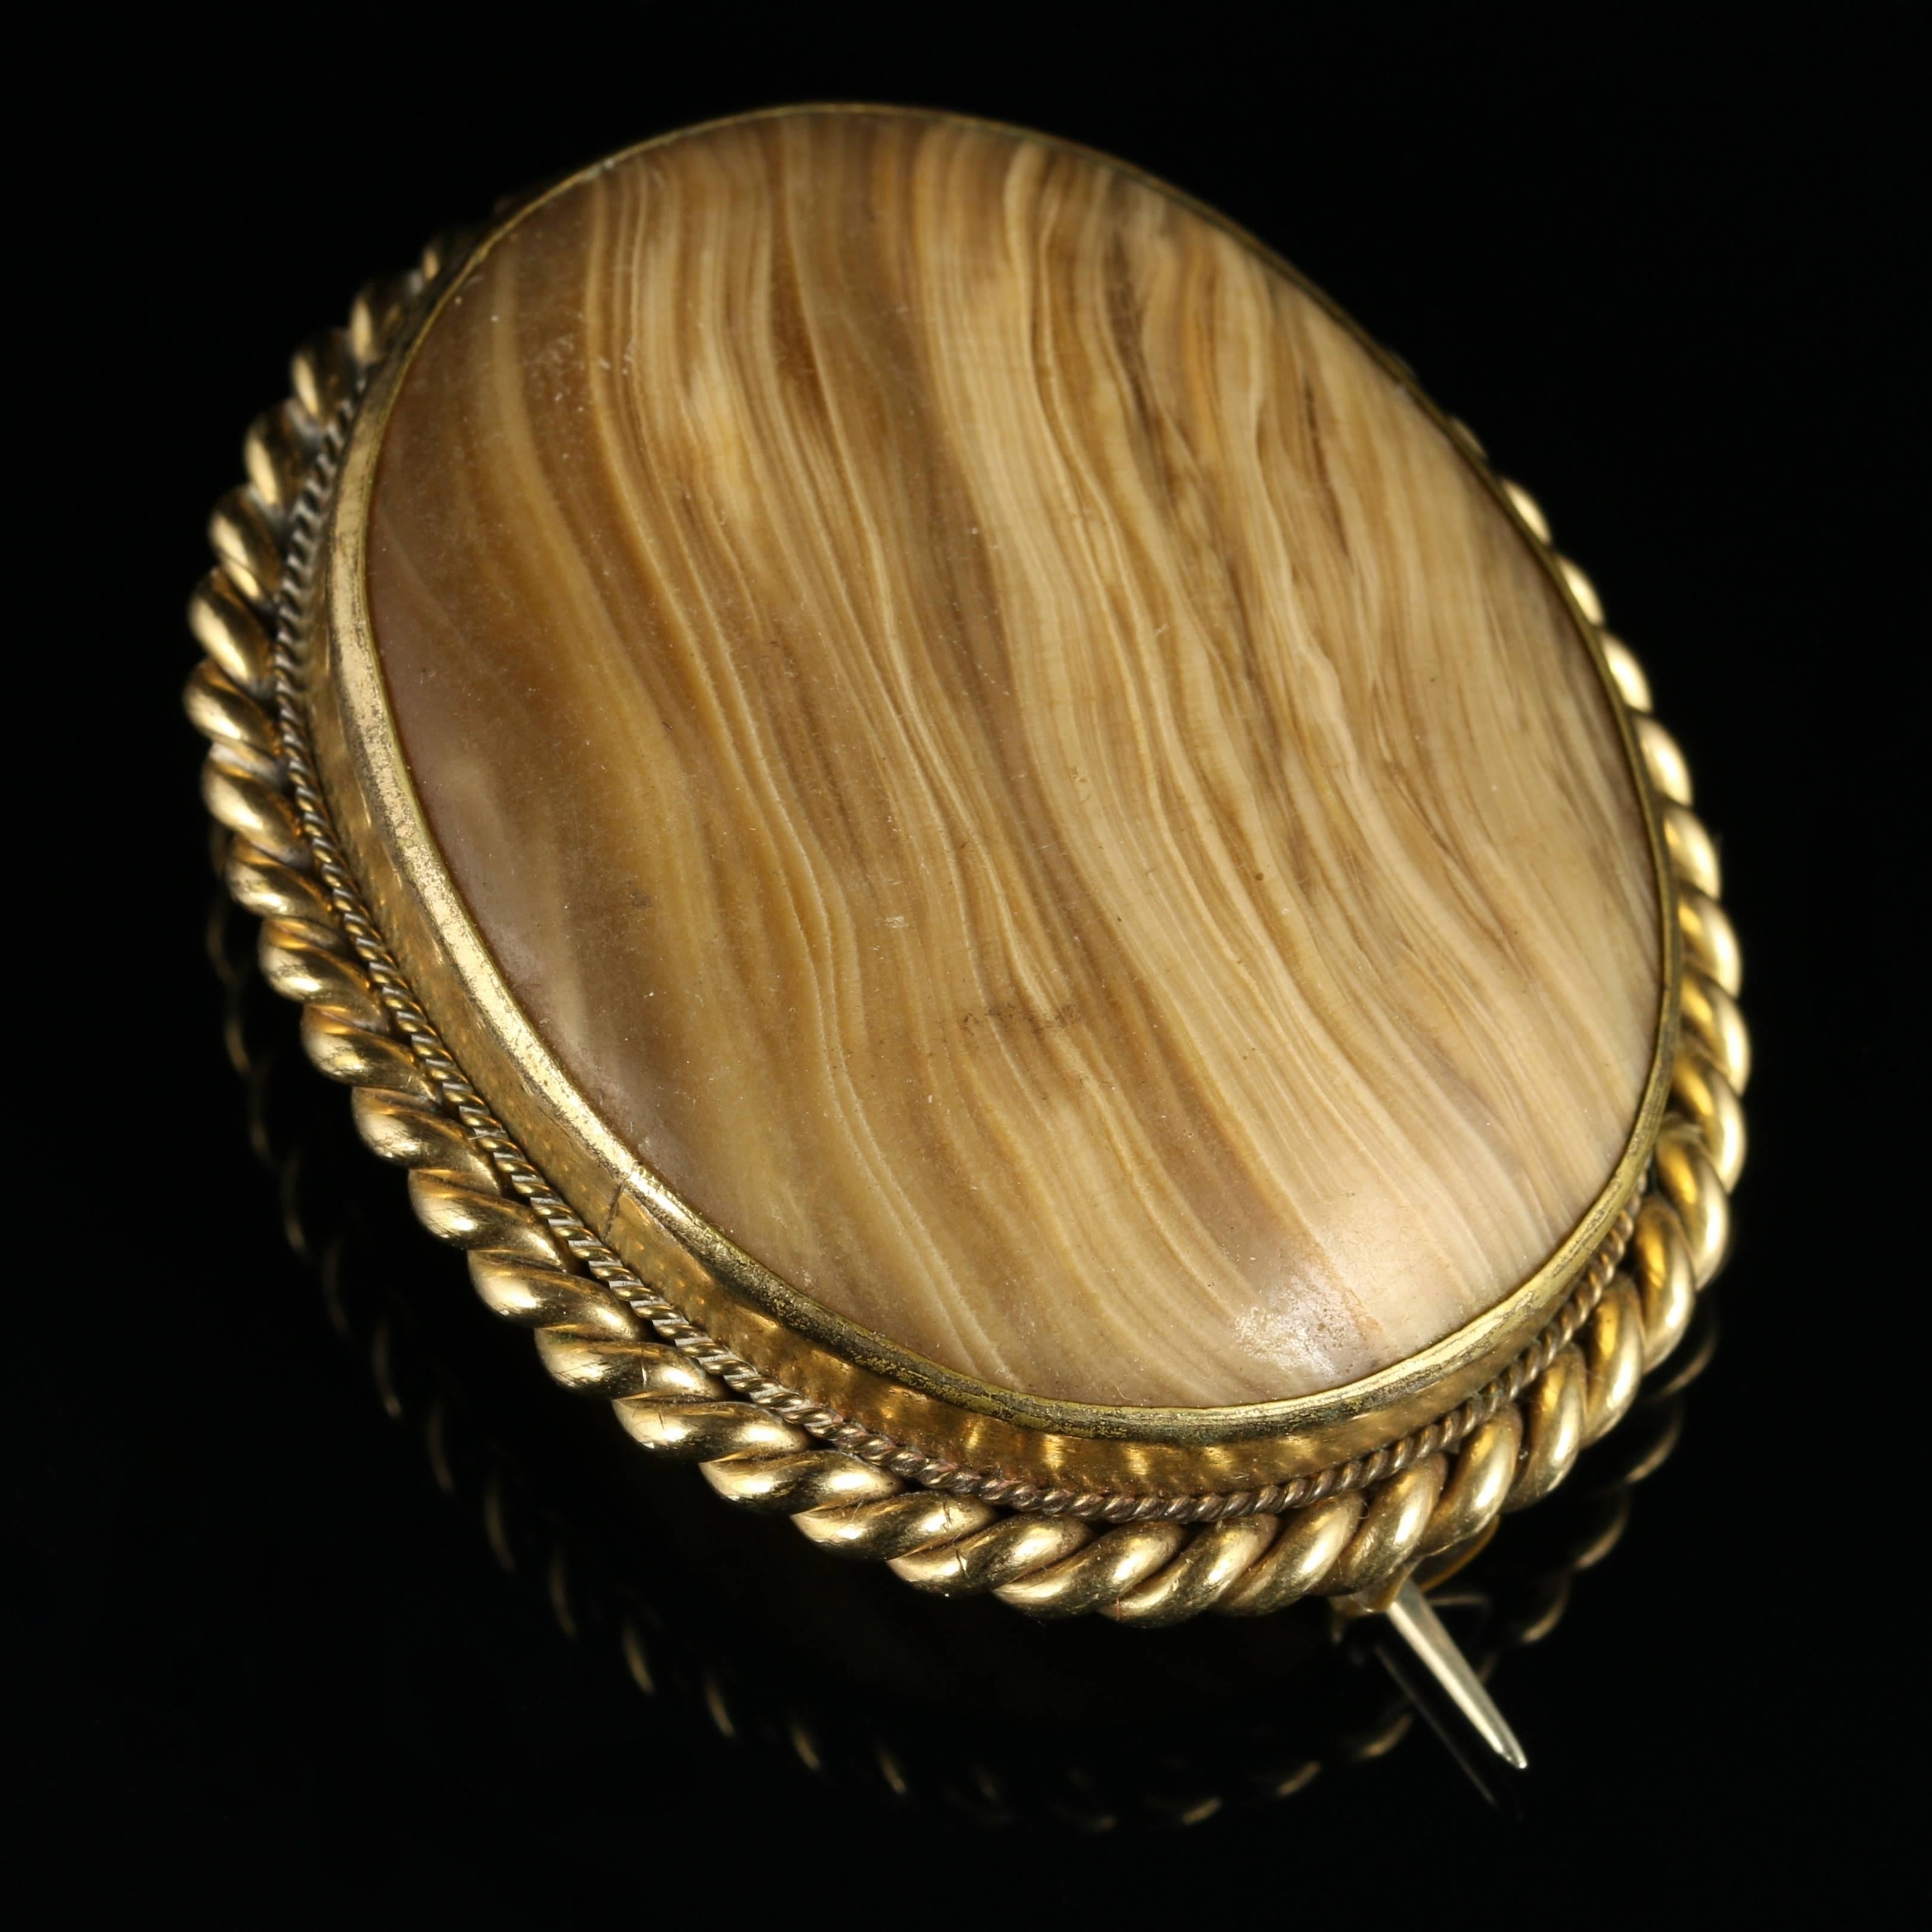 For more details please click continue reading down below...

This genuine antique Victorian large natural Agate brooch is Circa 1900.

Set in 9ct Yellow Gold.

The Agate shows the natural grain from within.

Agate has a balancing and healing energy